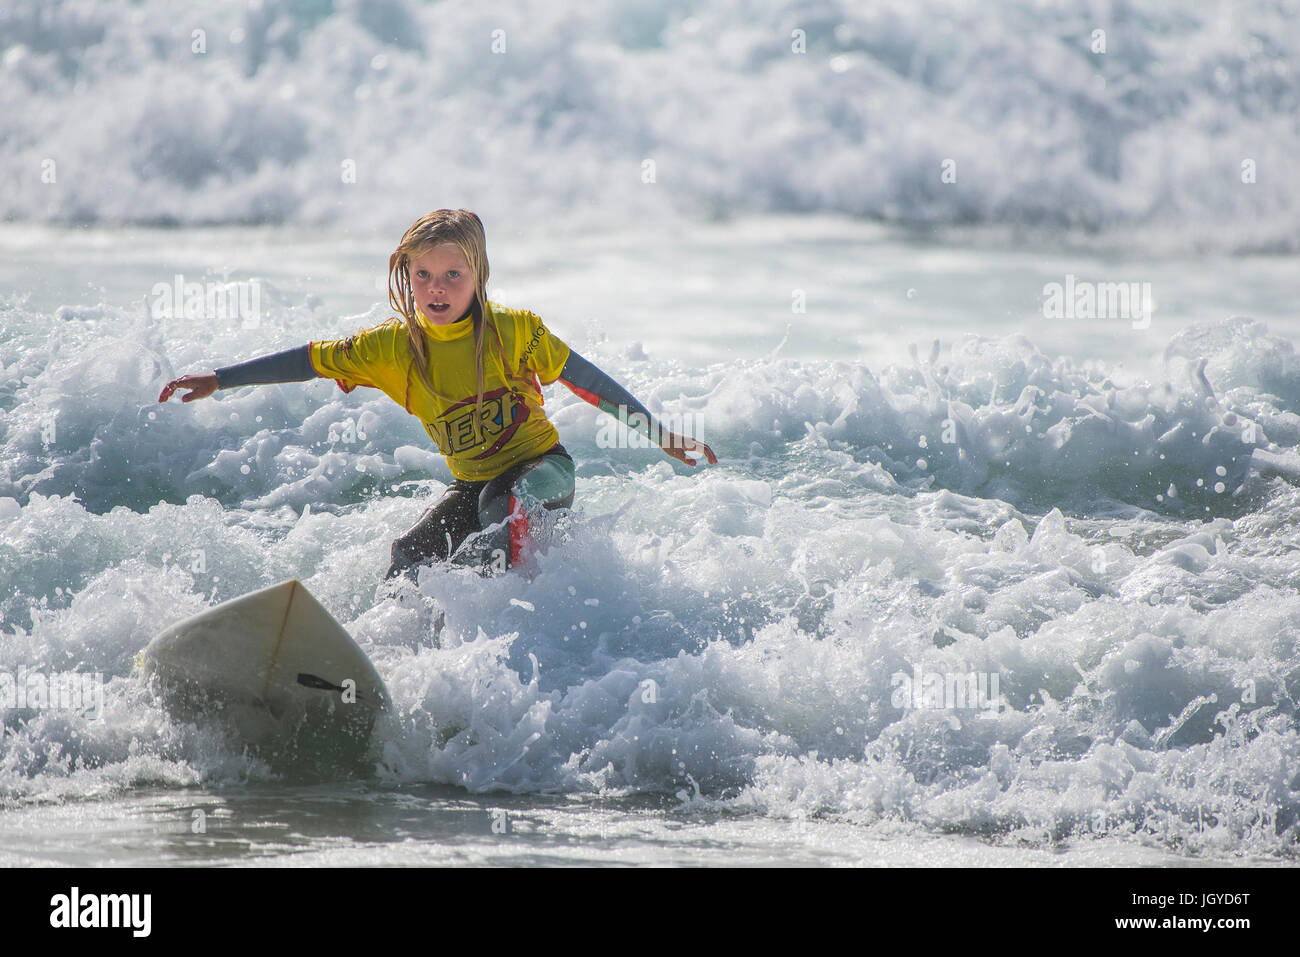 Surfing UK. Surfing child wave. An eight year old surfer competing in the UK Schools Surf Championship. Stock Photo